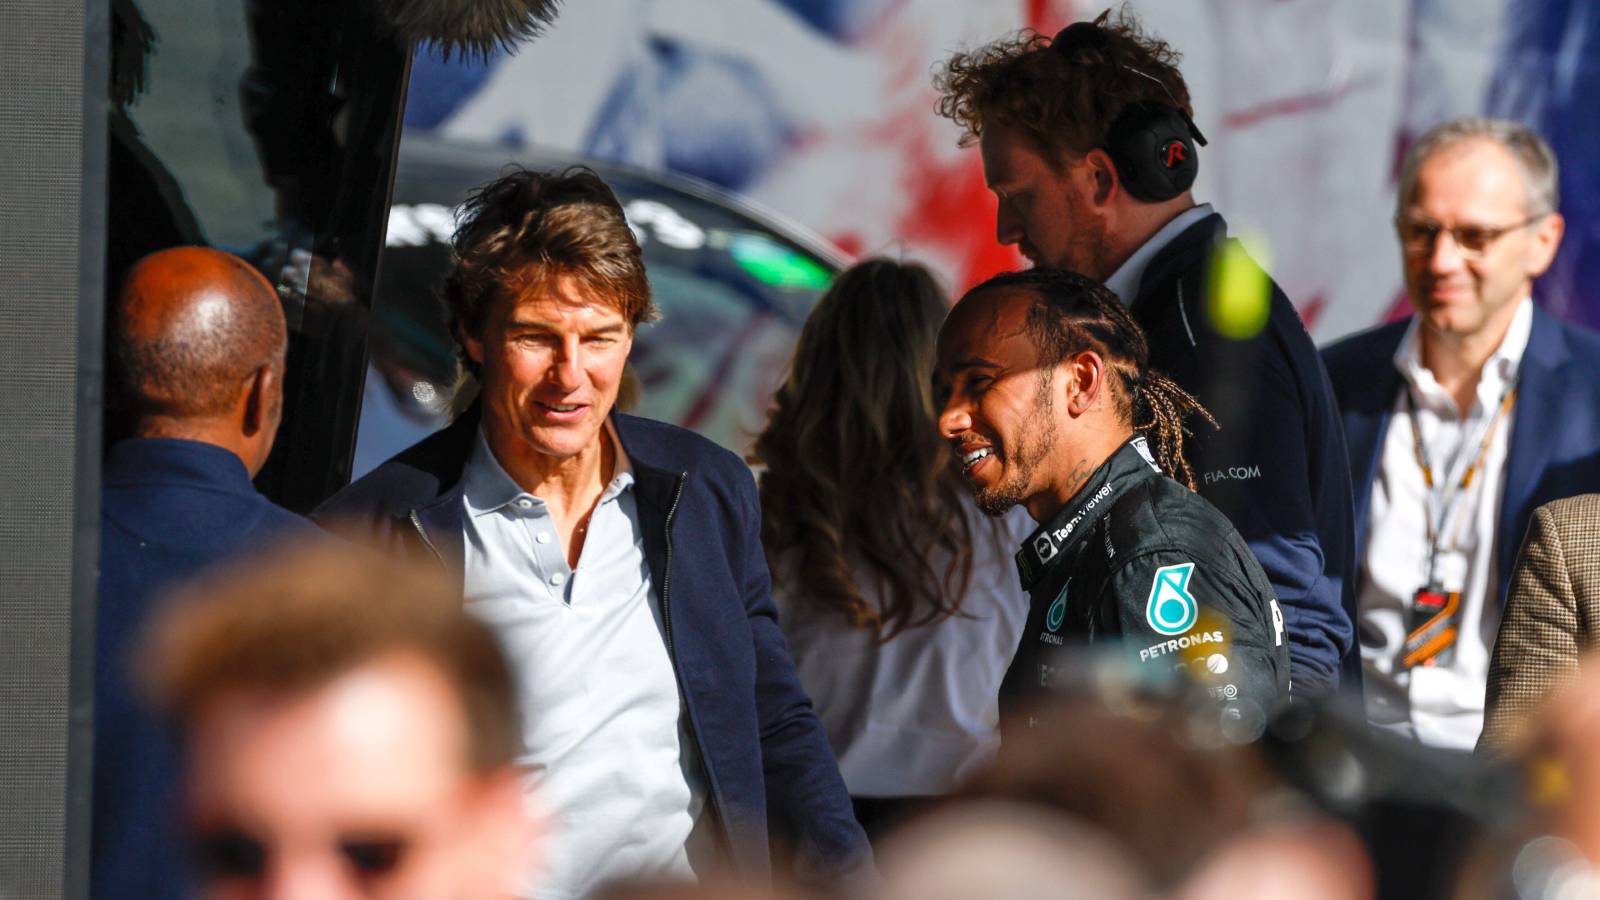 Lewis Hamilton with Tom Cruise at the British GP. Silverstone July 2022.